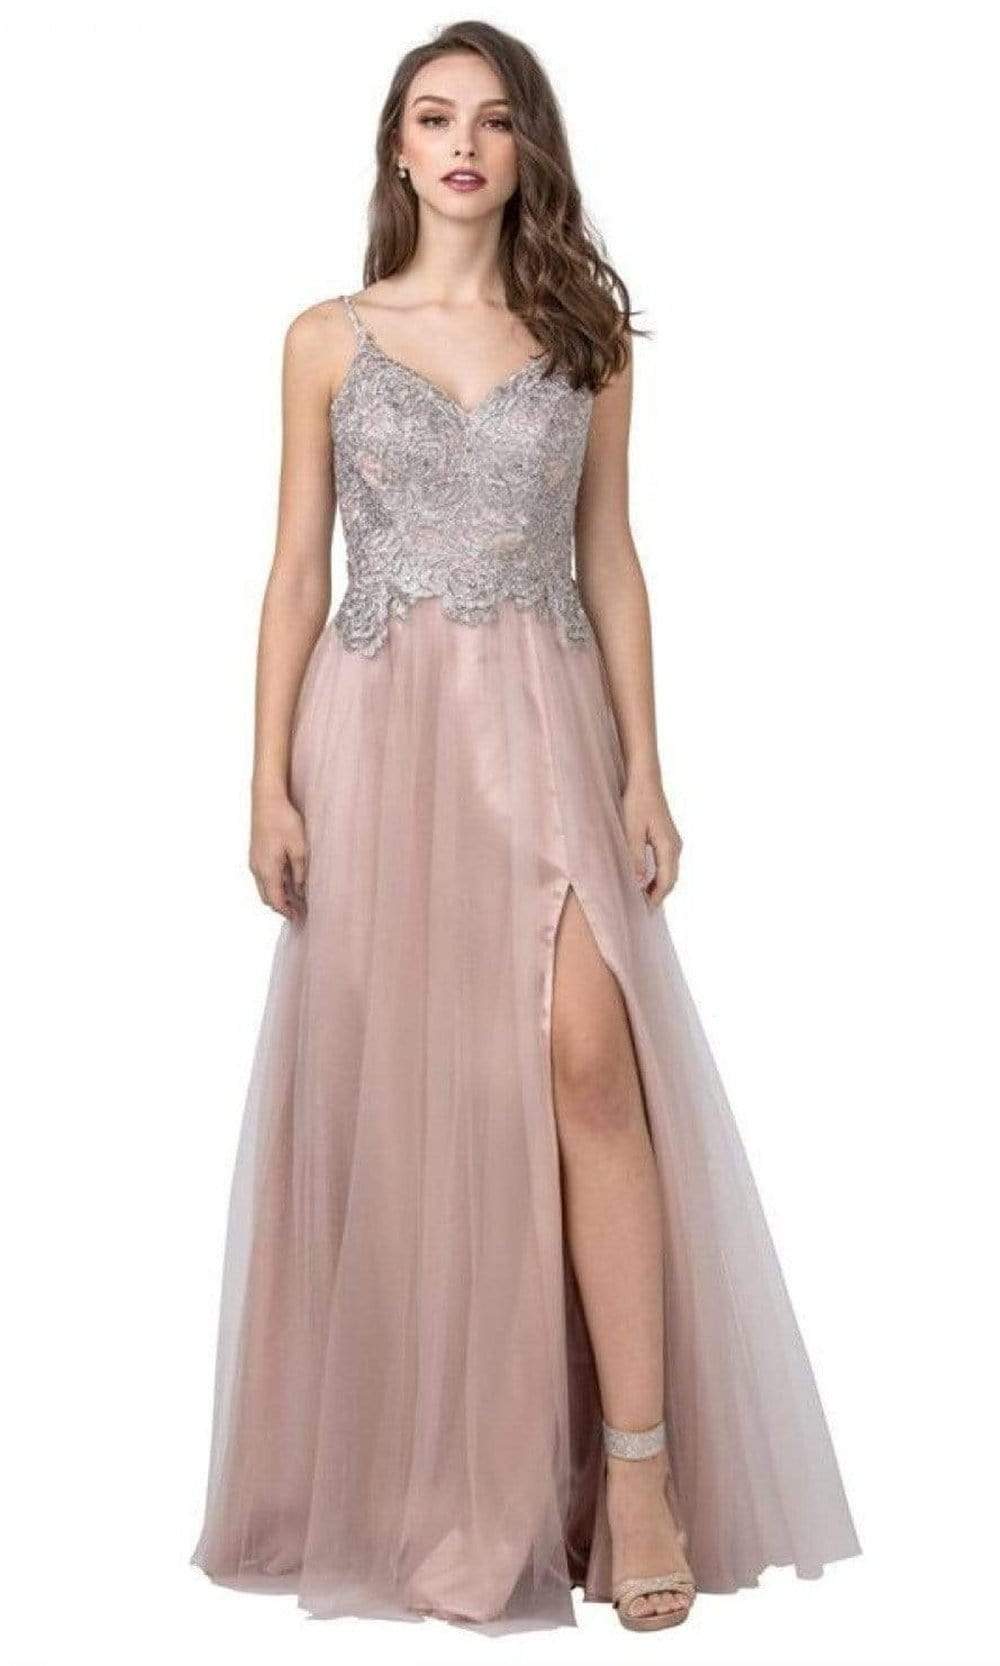 Aspeed Design - L2447 Embroidered Bod Glittery A-Line Gown
